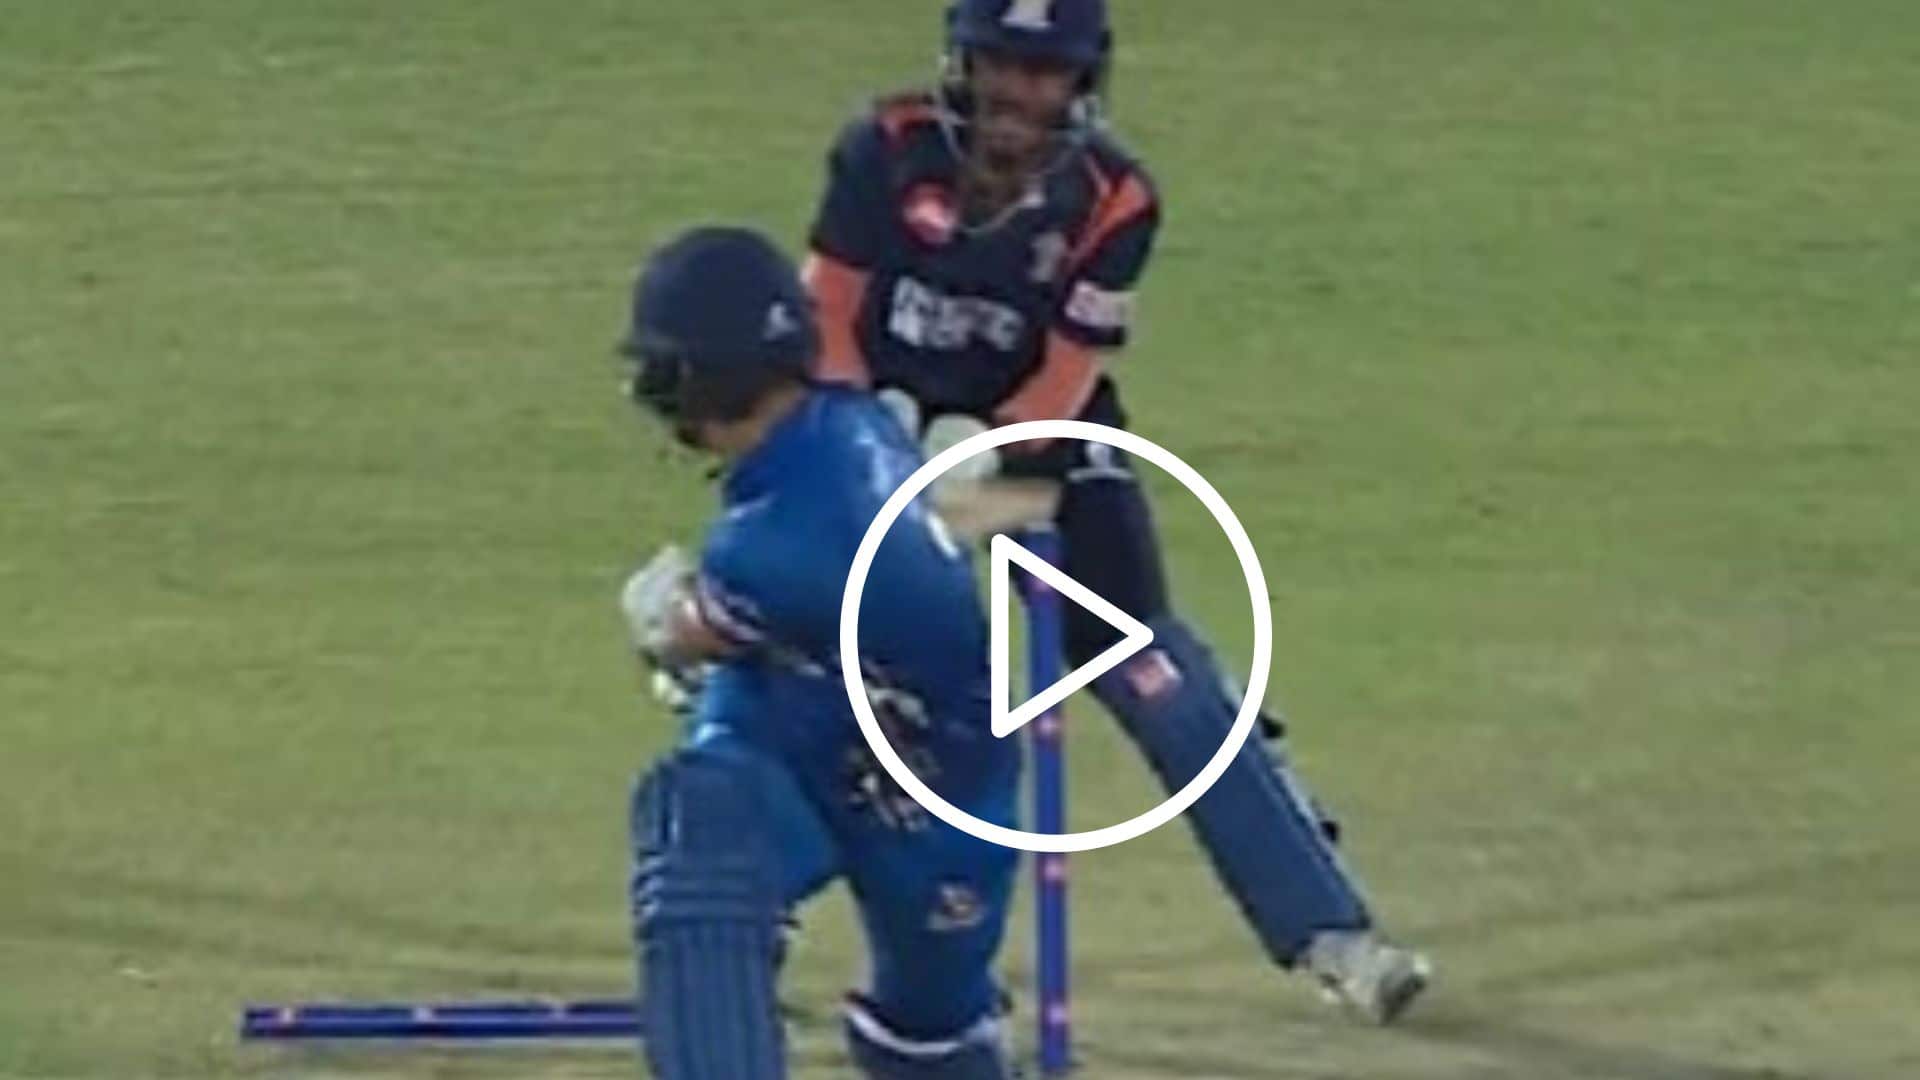 [Watch] Rinku Singh's Middle Stump Knocked Out Of The Ground In UP T20 League